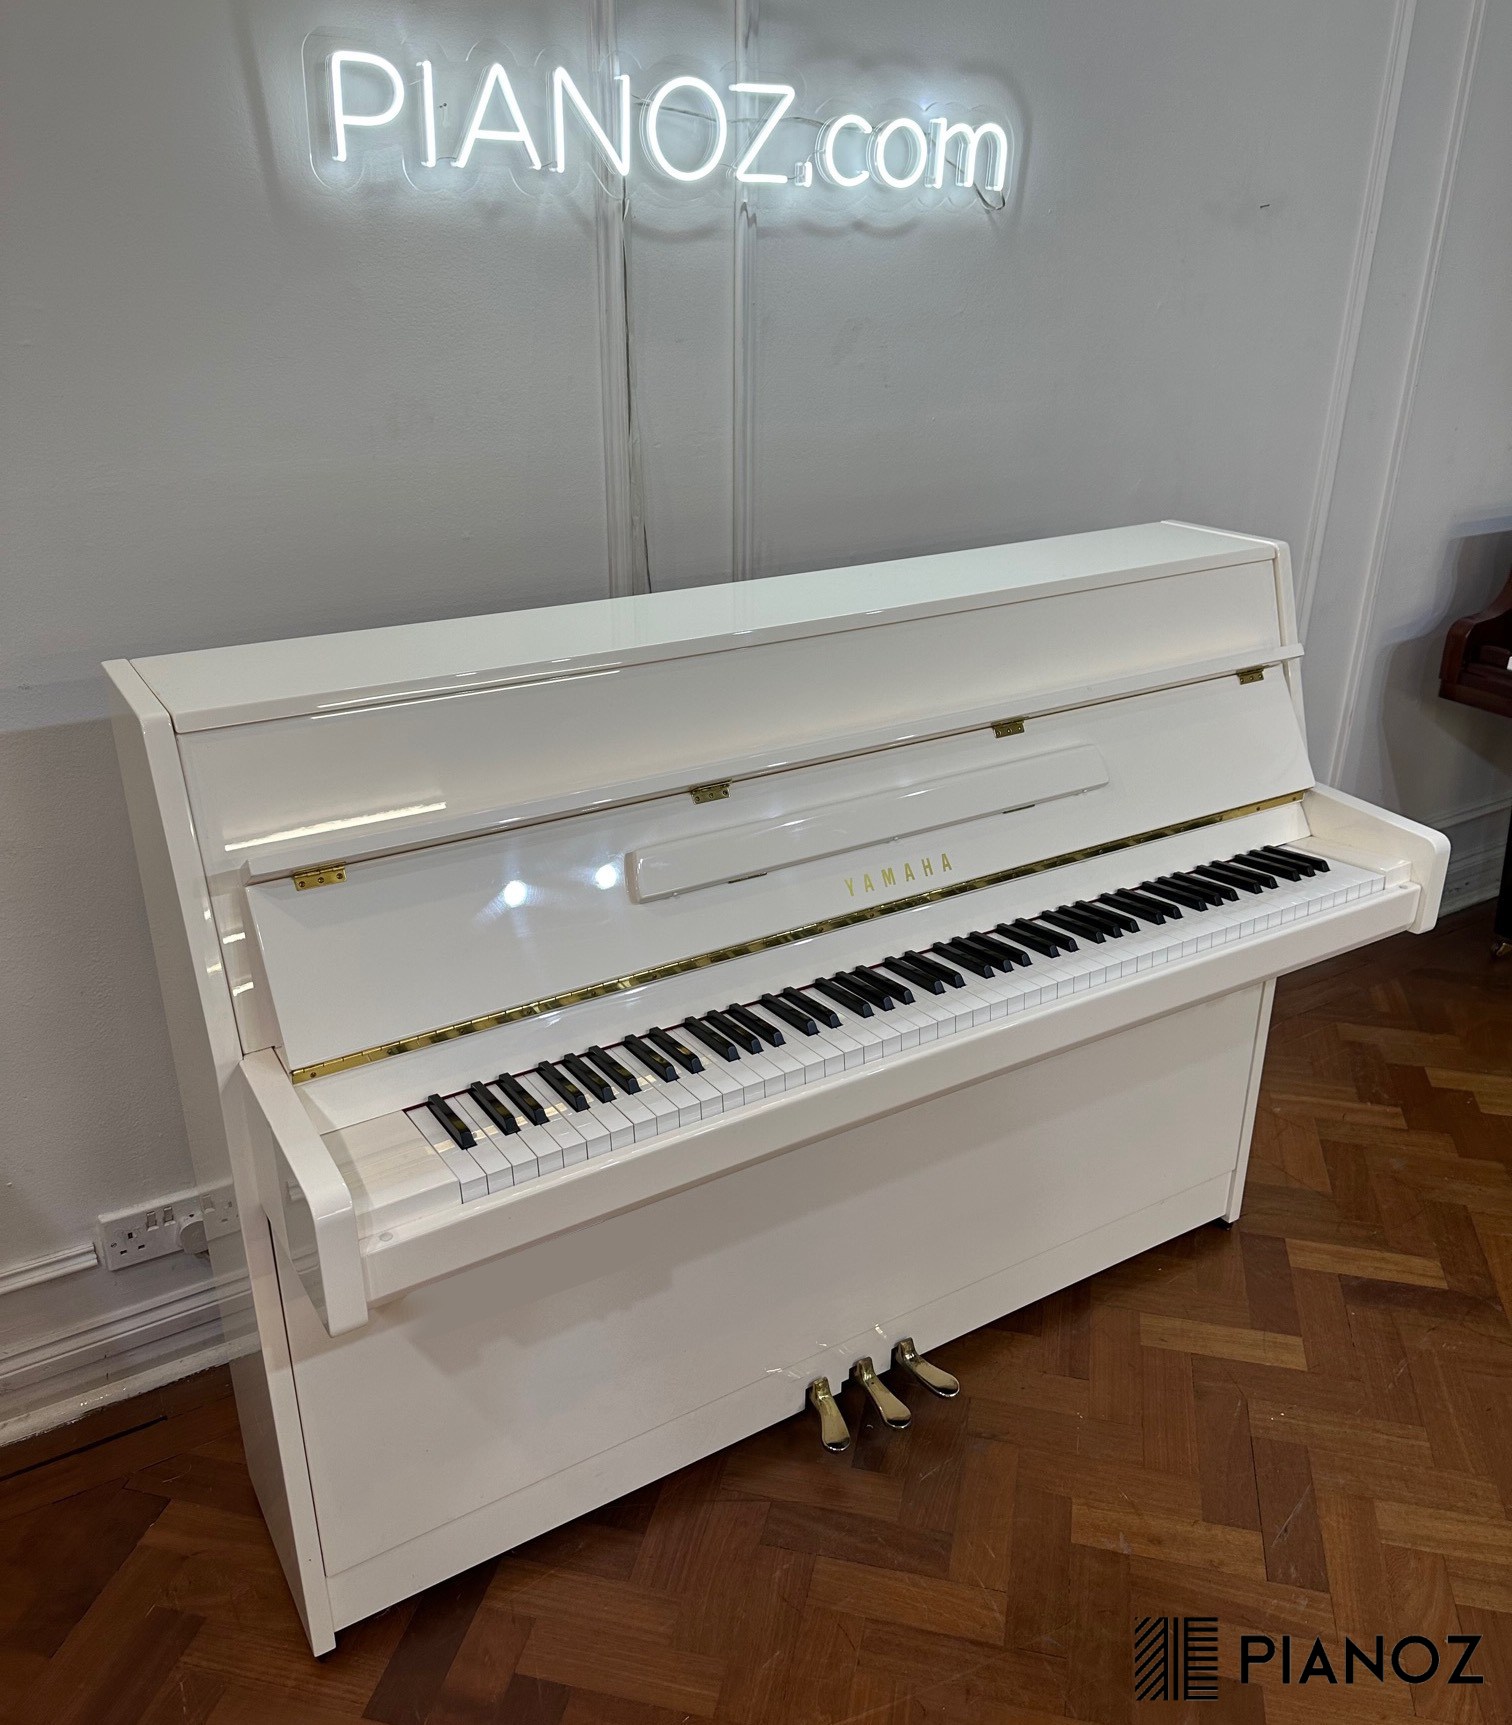 Yamaha B1 White Upright Piano piano for sale in UK